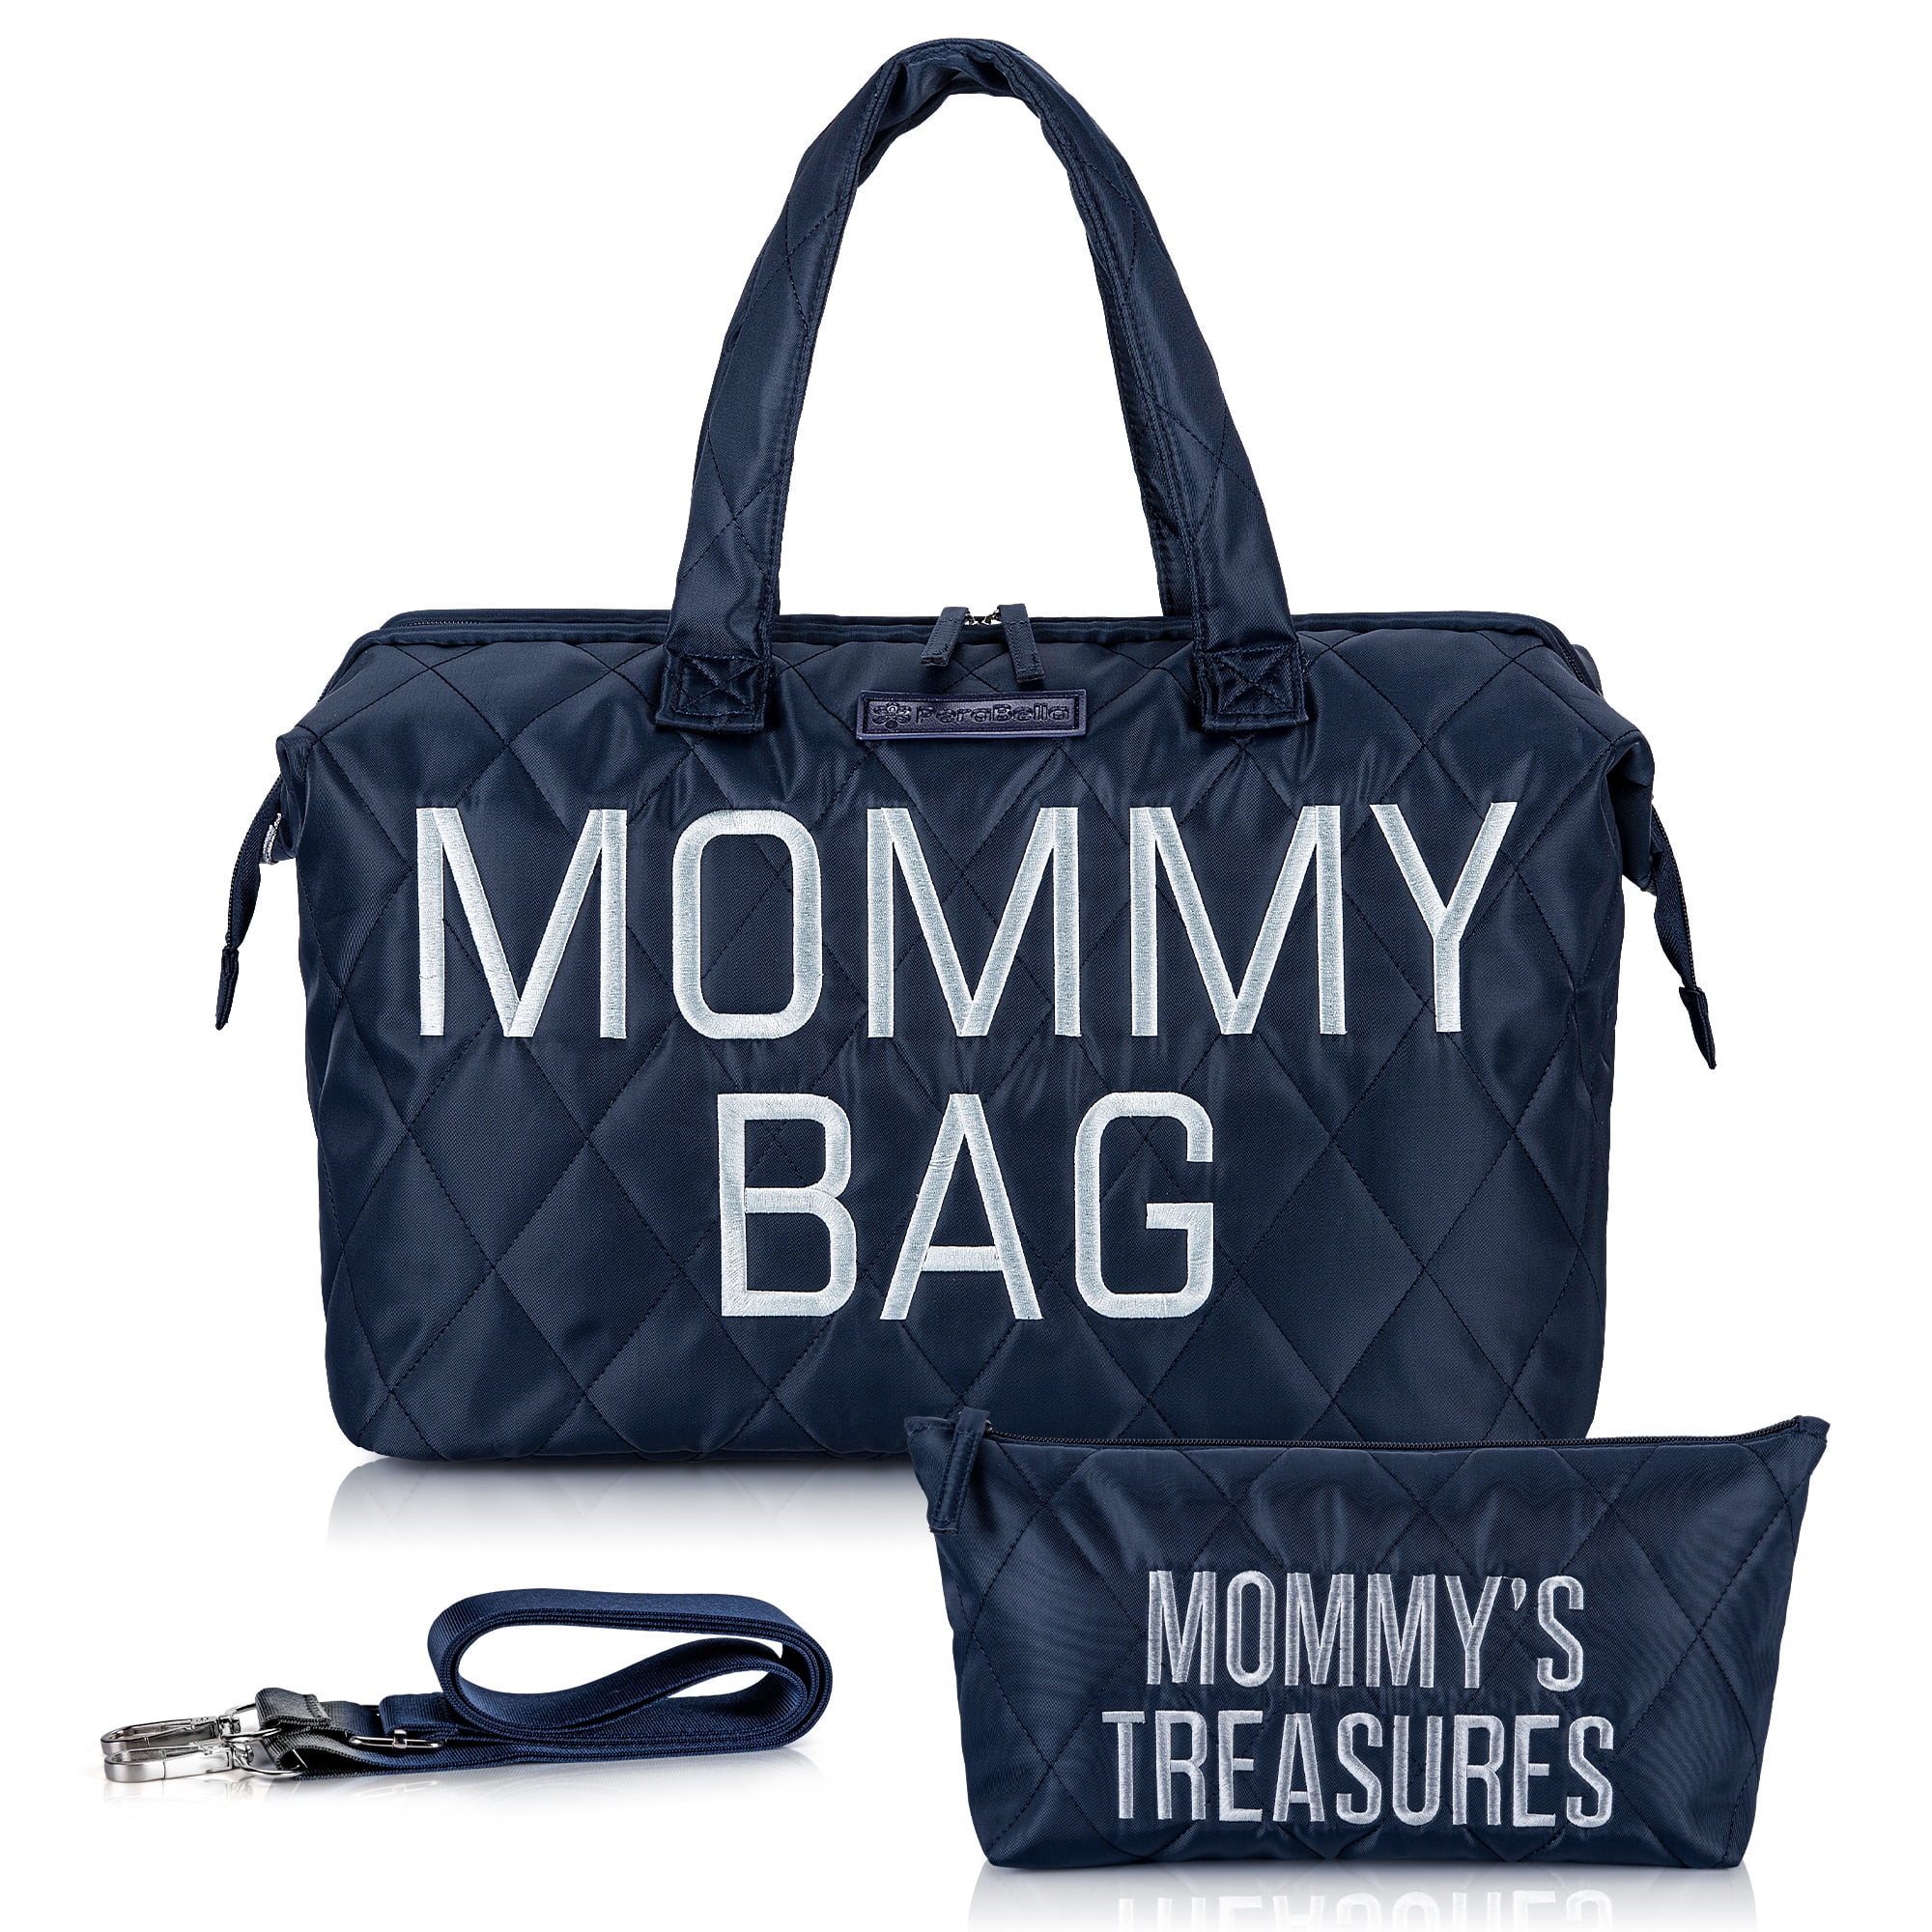 Houseables Mommy Bag, Hospital Bags for Labor and Delivery, Baby Diaper  Tote, 3 Piece, 15.7 x 8 x 10.6, Navy Blue, Nylon, Mom Essentials Duffle